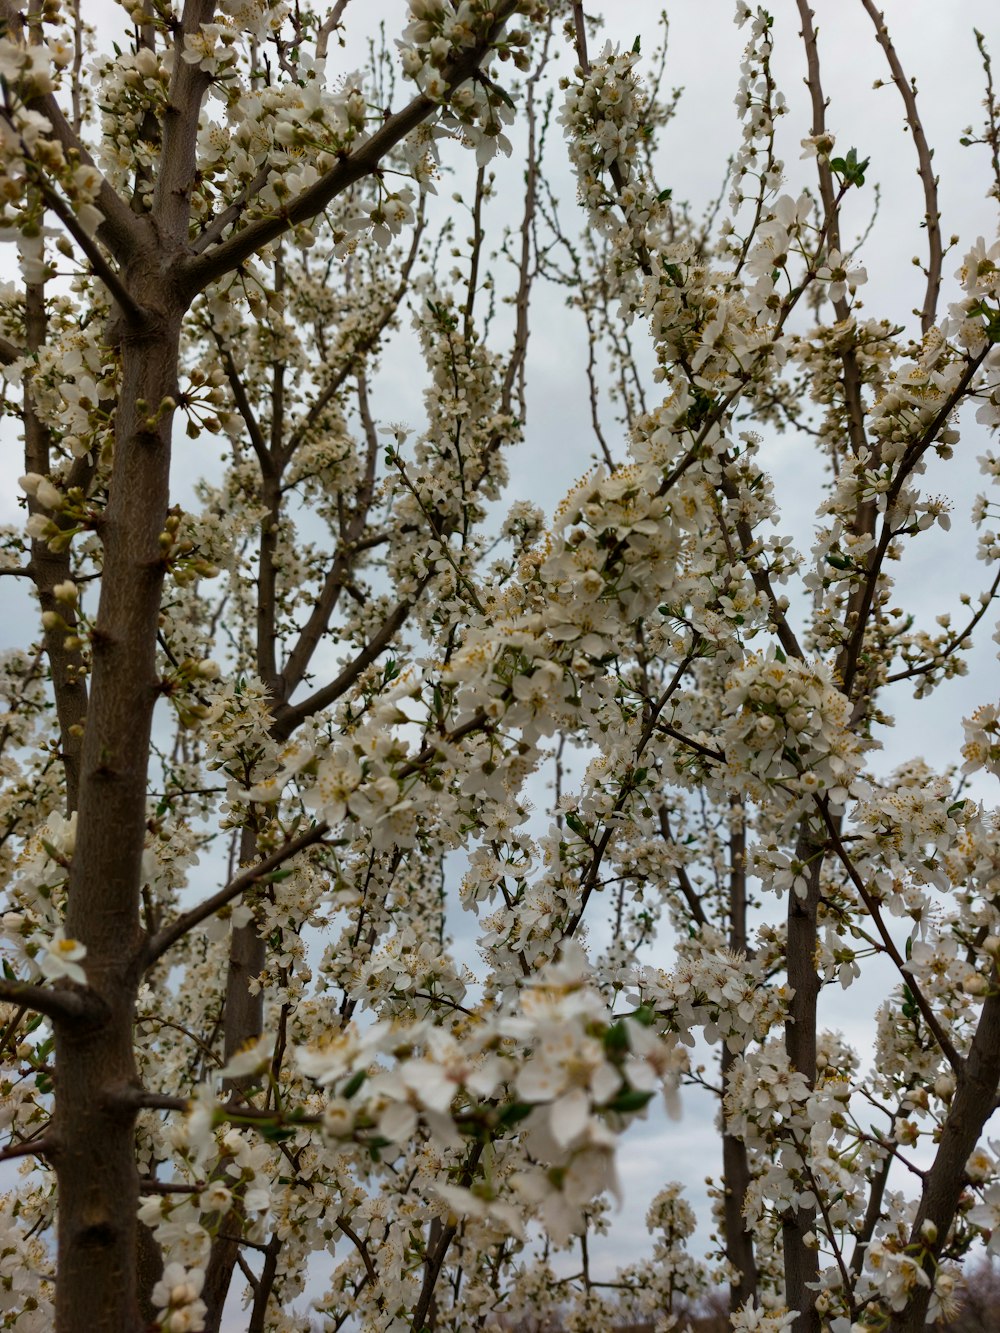 a group of trees with white flowers on them